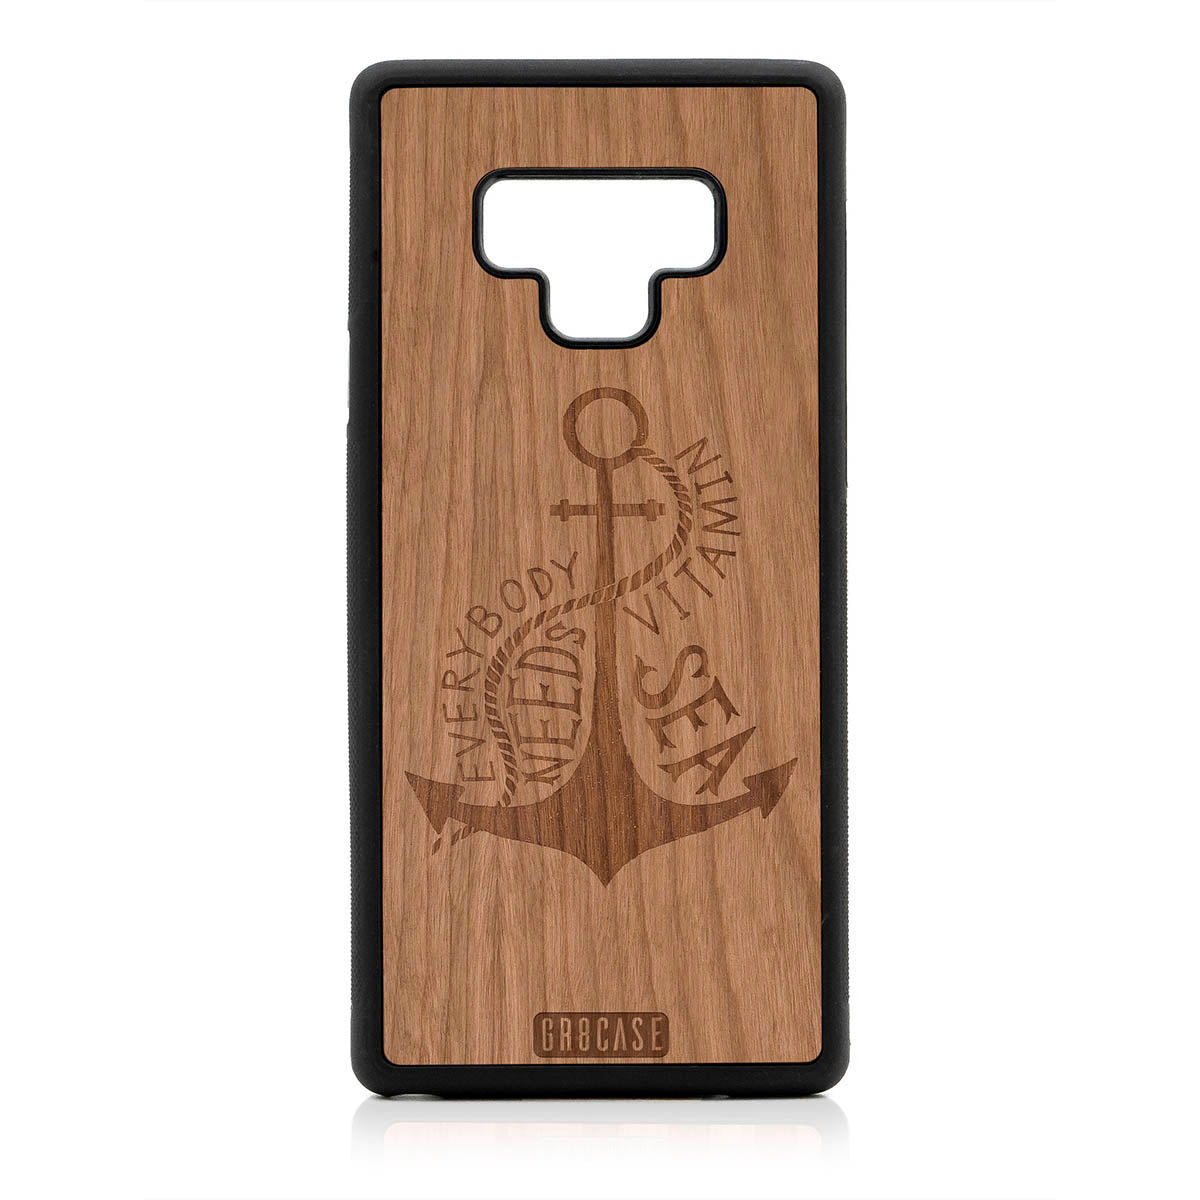 Everybody Needs Vitamin Sea (Anchor) Design Wood Case For Samsung Galaxy Note 9 by GR8CASE